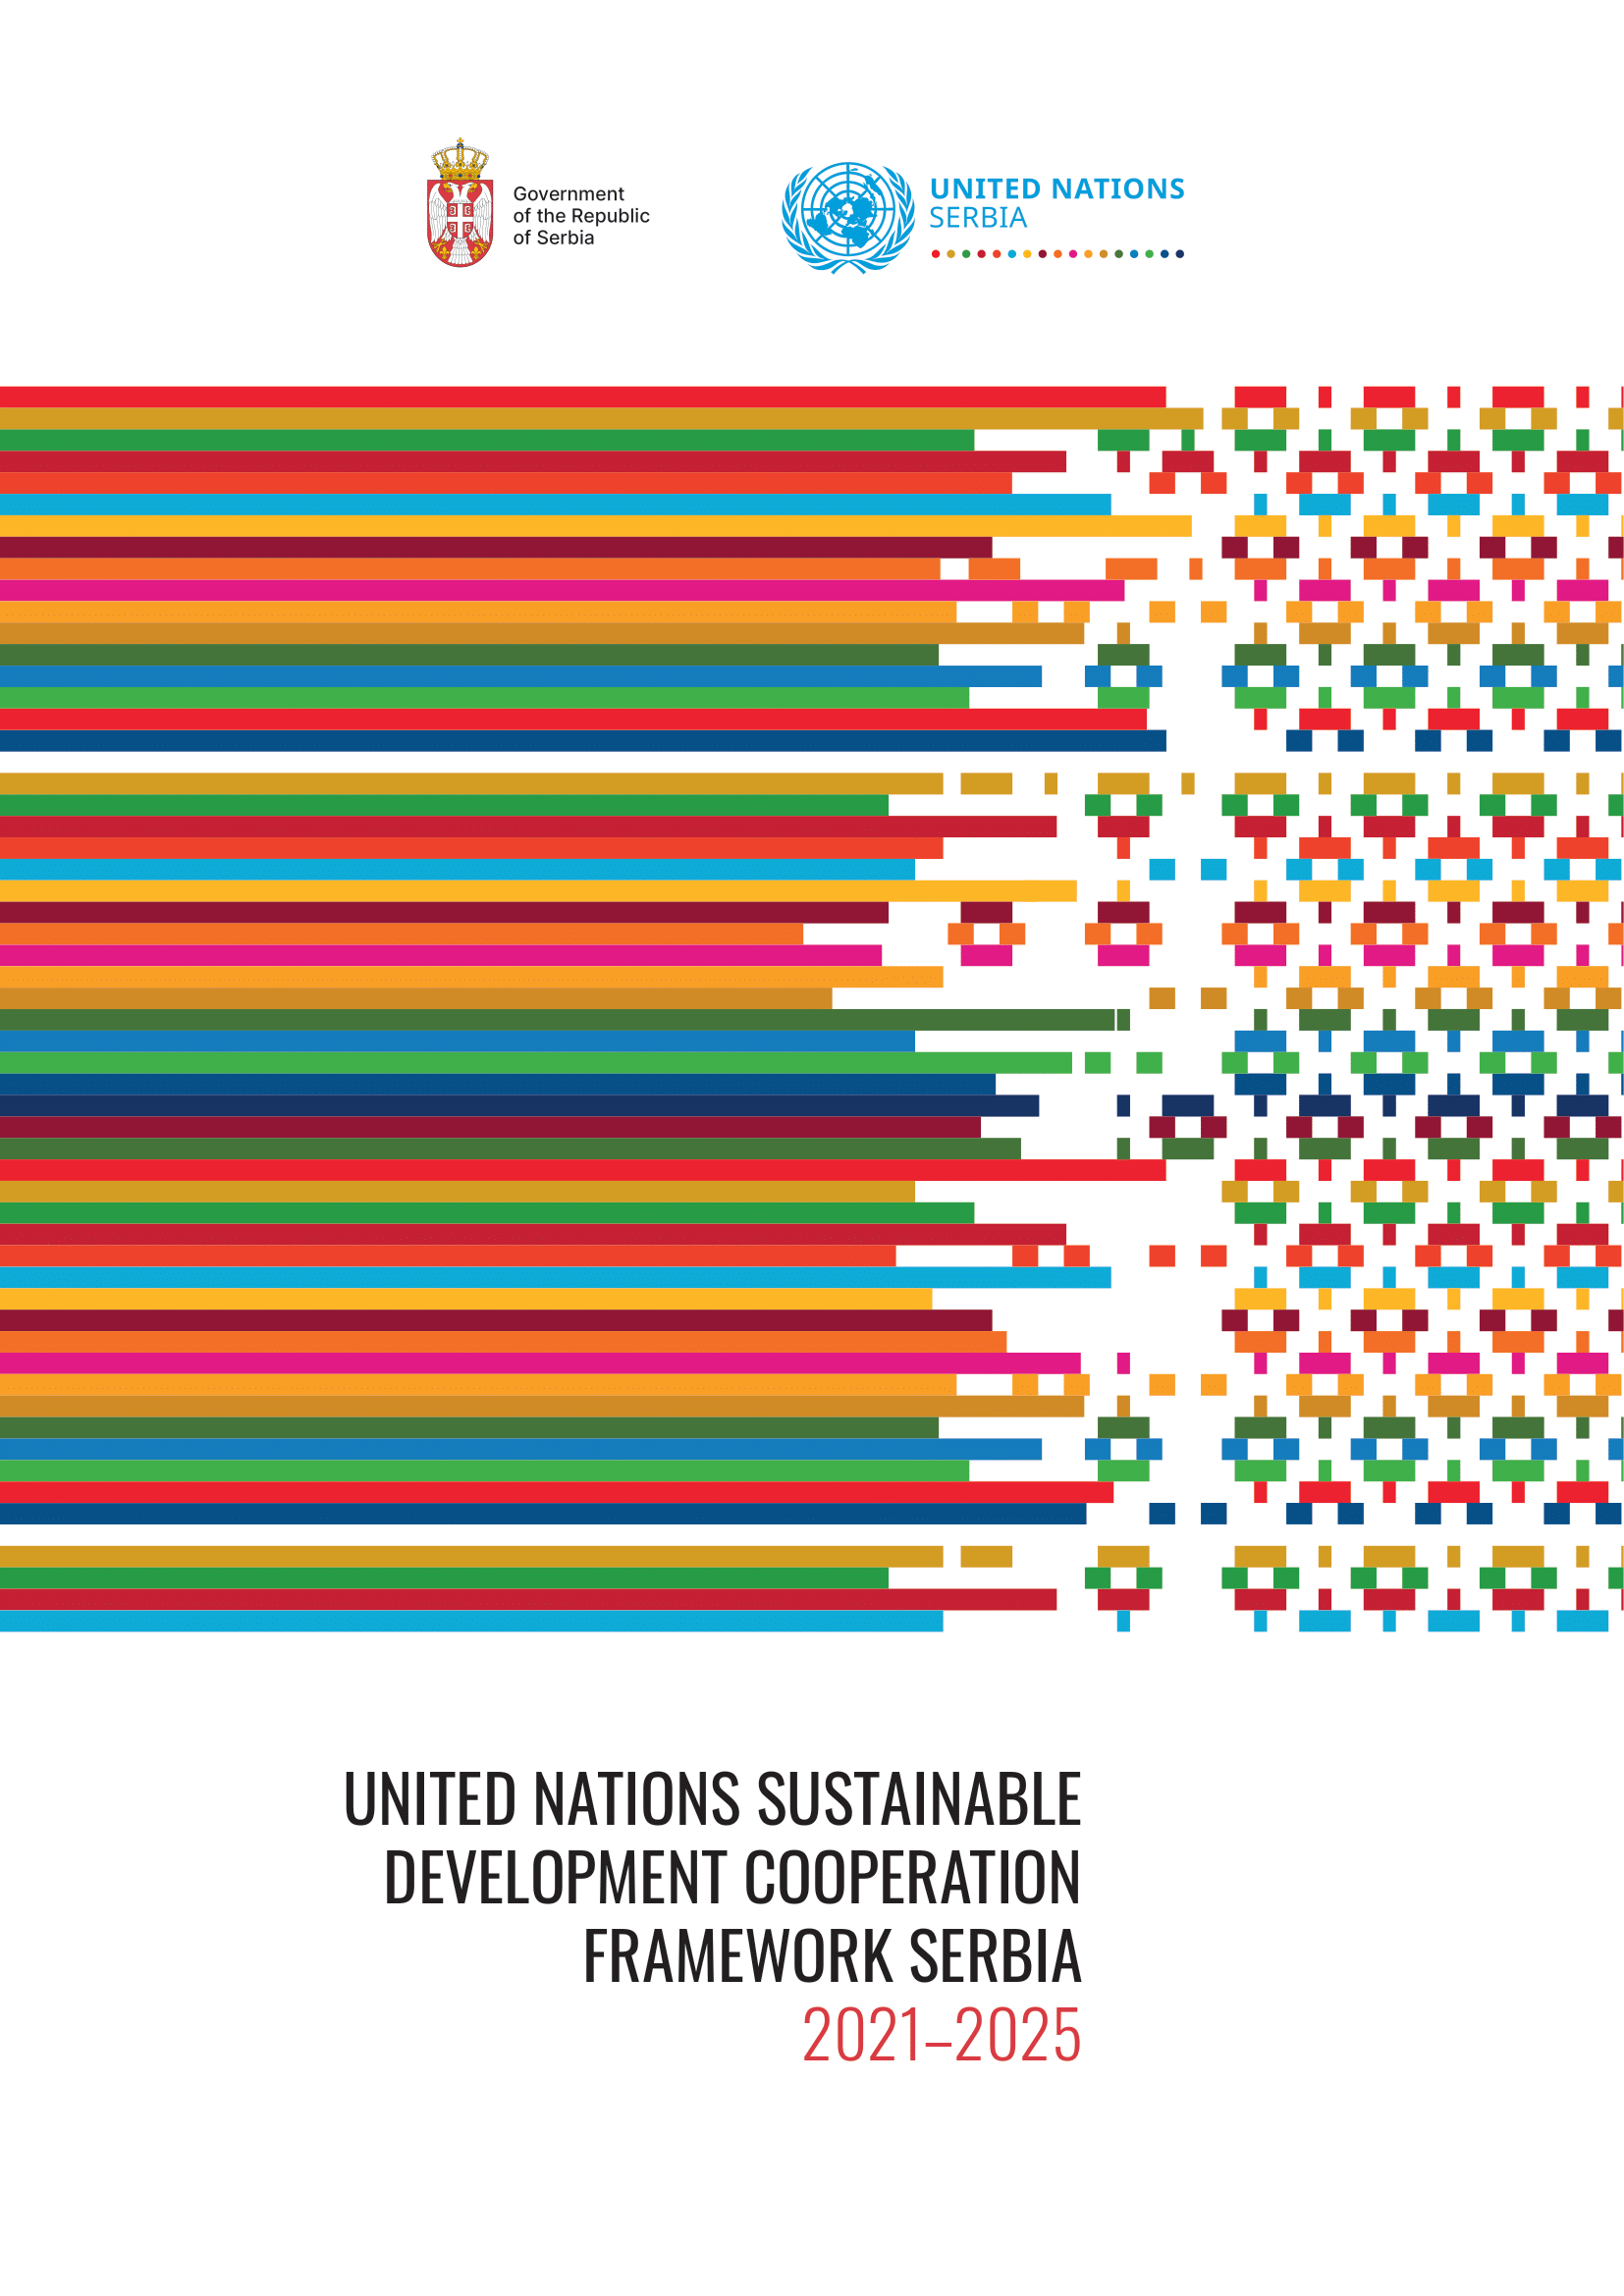 Sustainable Development Cooperation Framework between United Nations and the Republic of Serbia 2021-2025